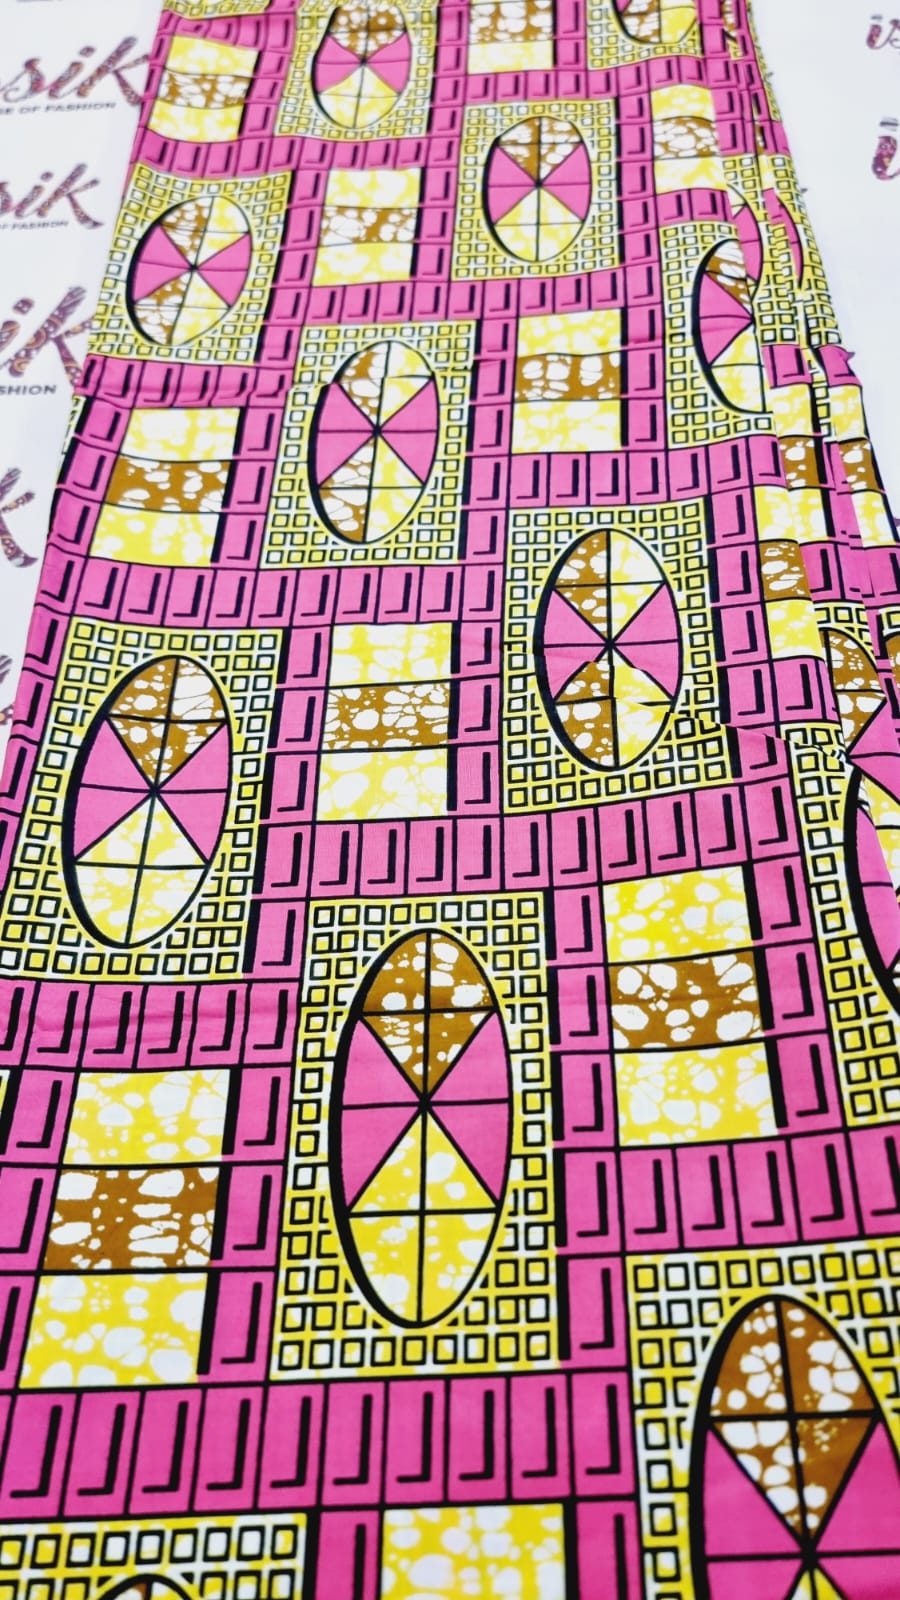 Pink & Yellow African Print Fabric - House of Prints